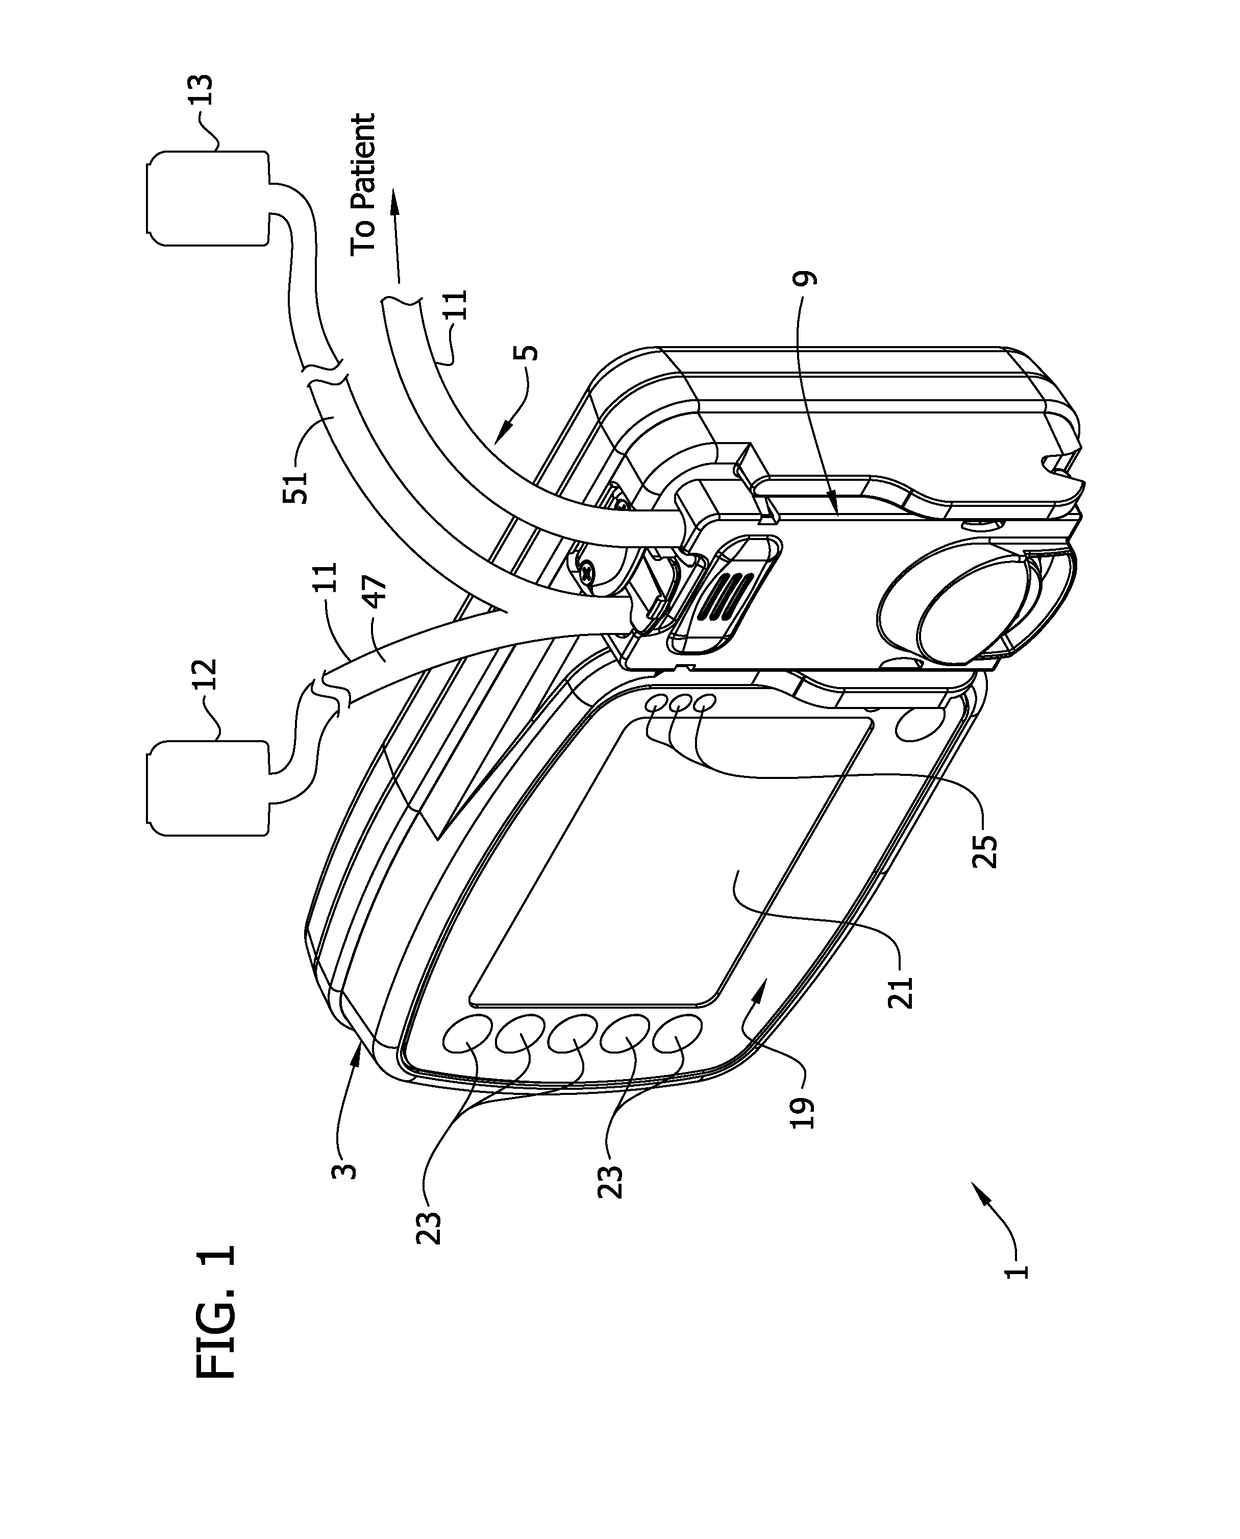 Feeding rate compensated pump and related methods therefor